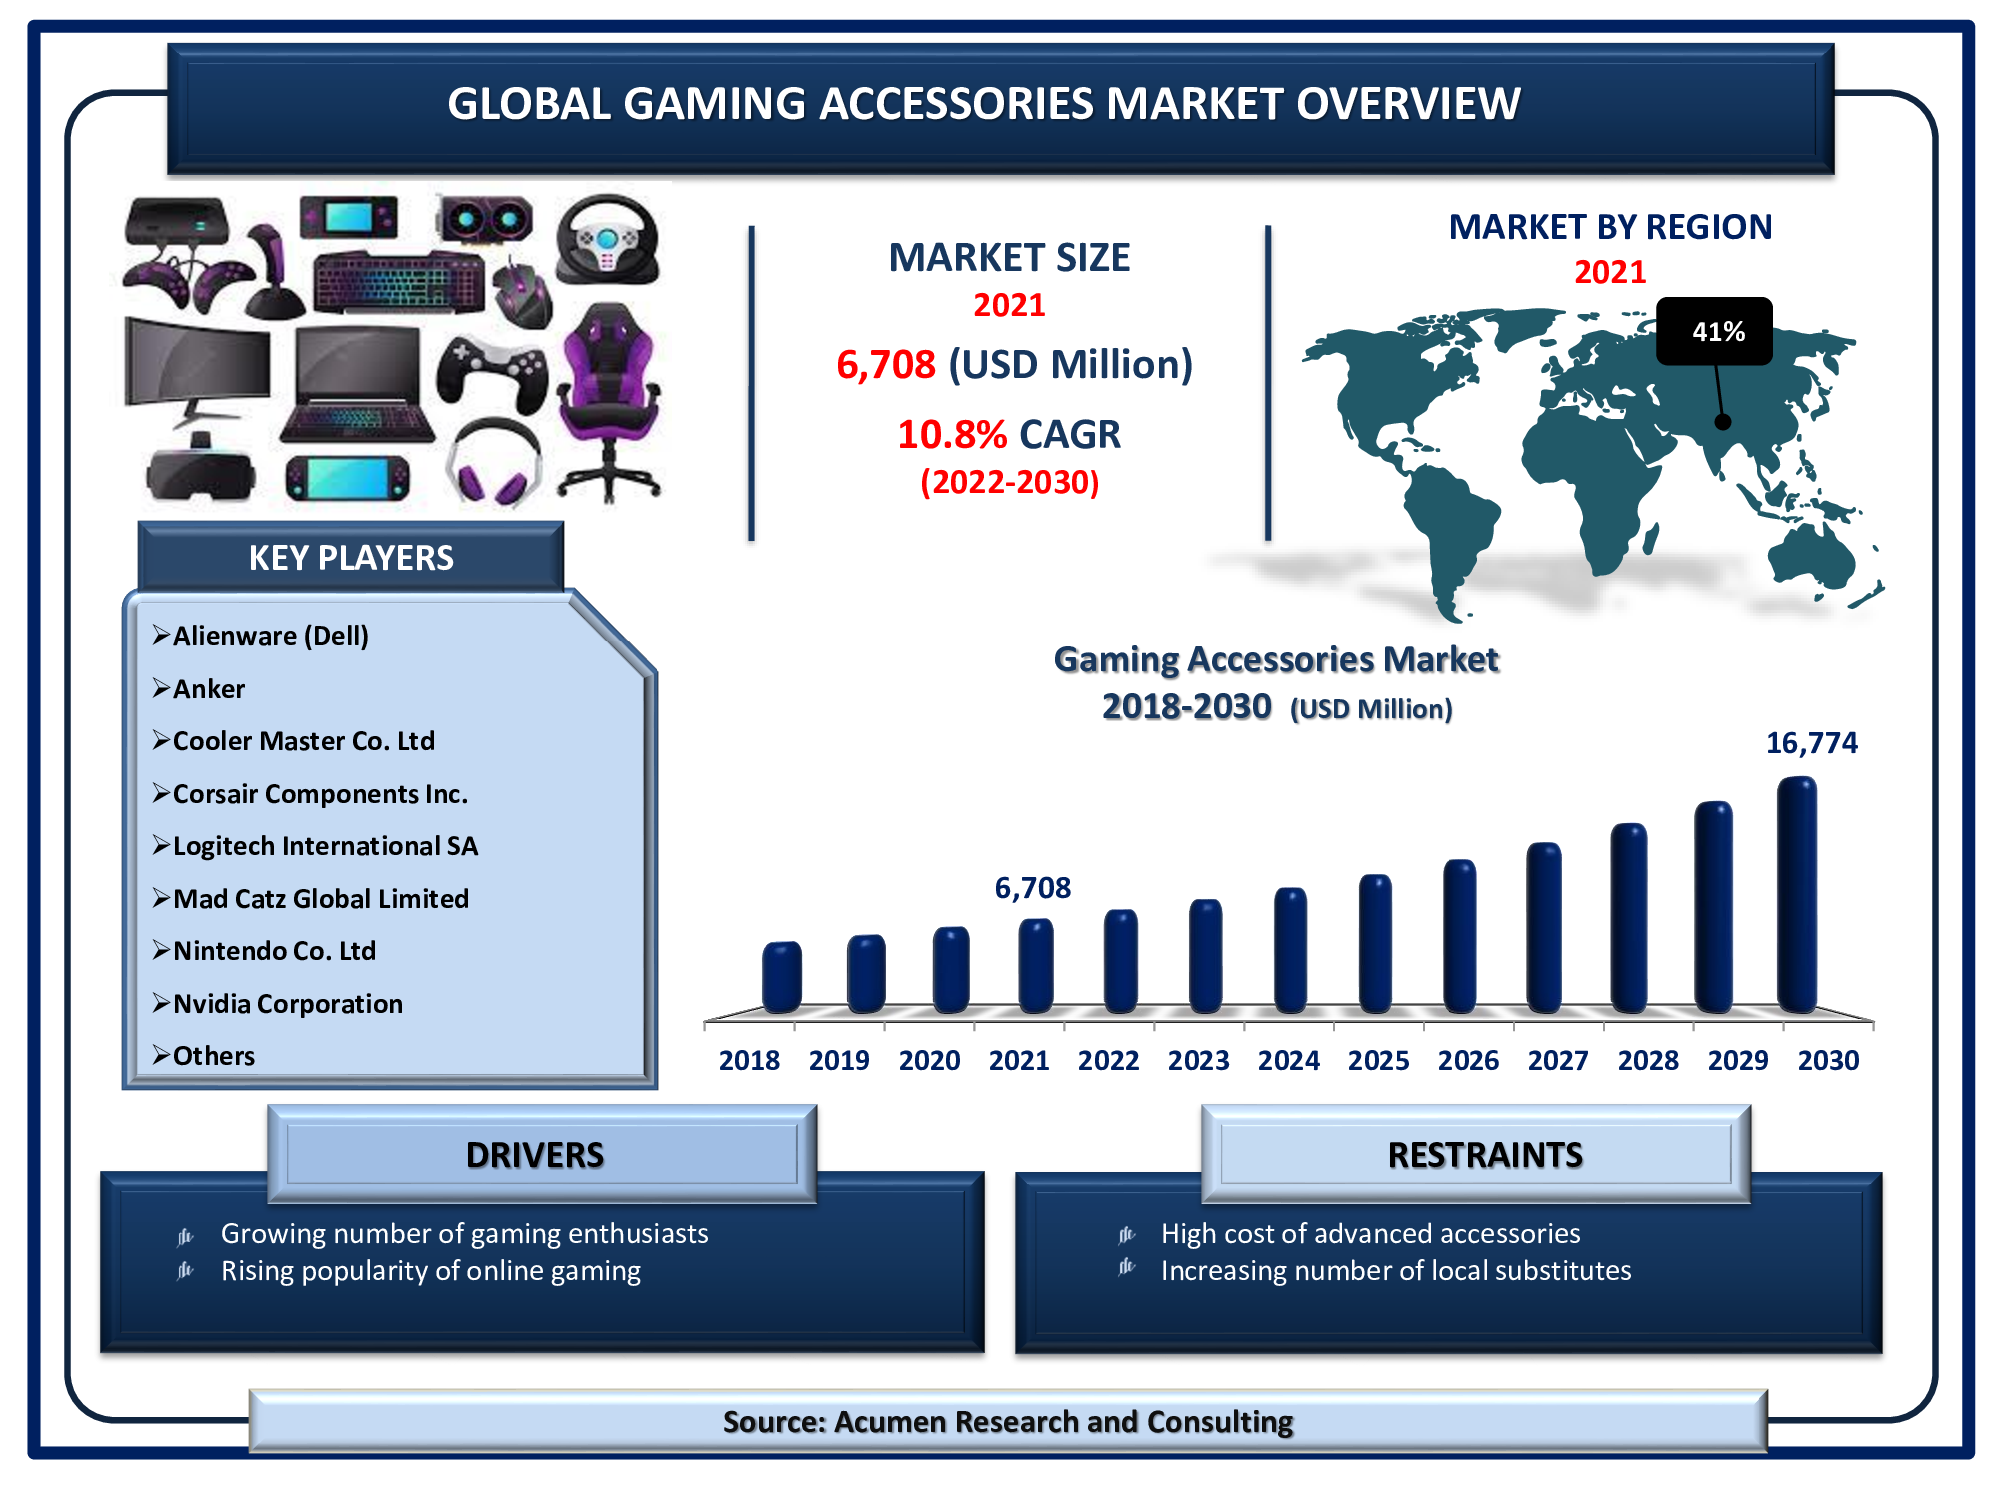 Gaming Accessories Market size accounted for USD 6,708 Million in 2021 and is projected to reach a market size of USD 16,774 Million by 2030; growing at a CAGR of 10.8%